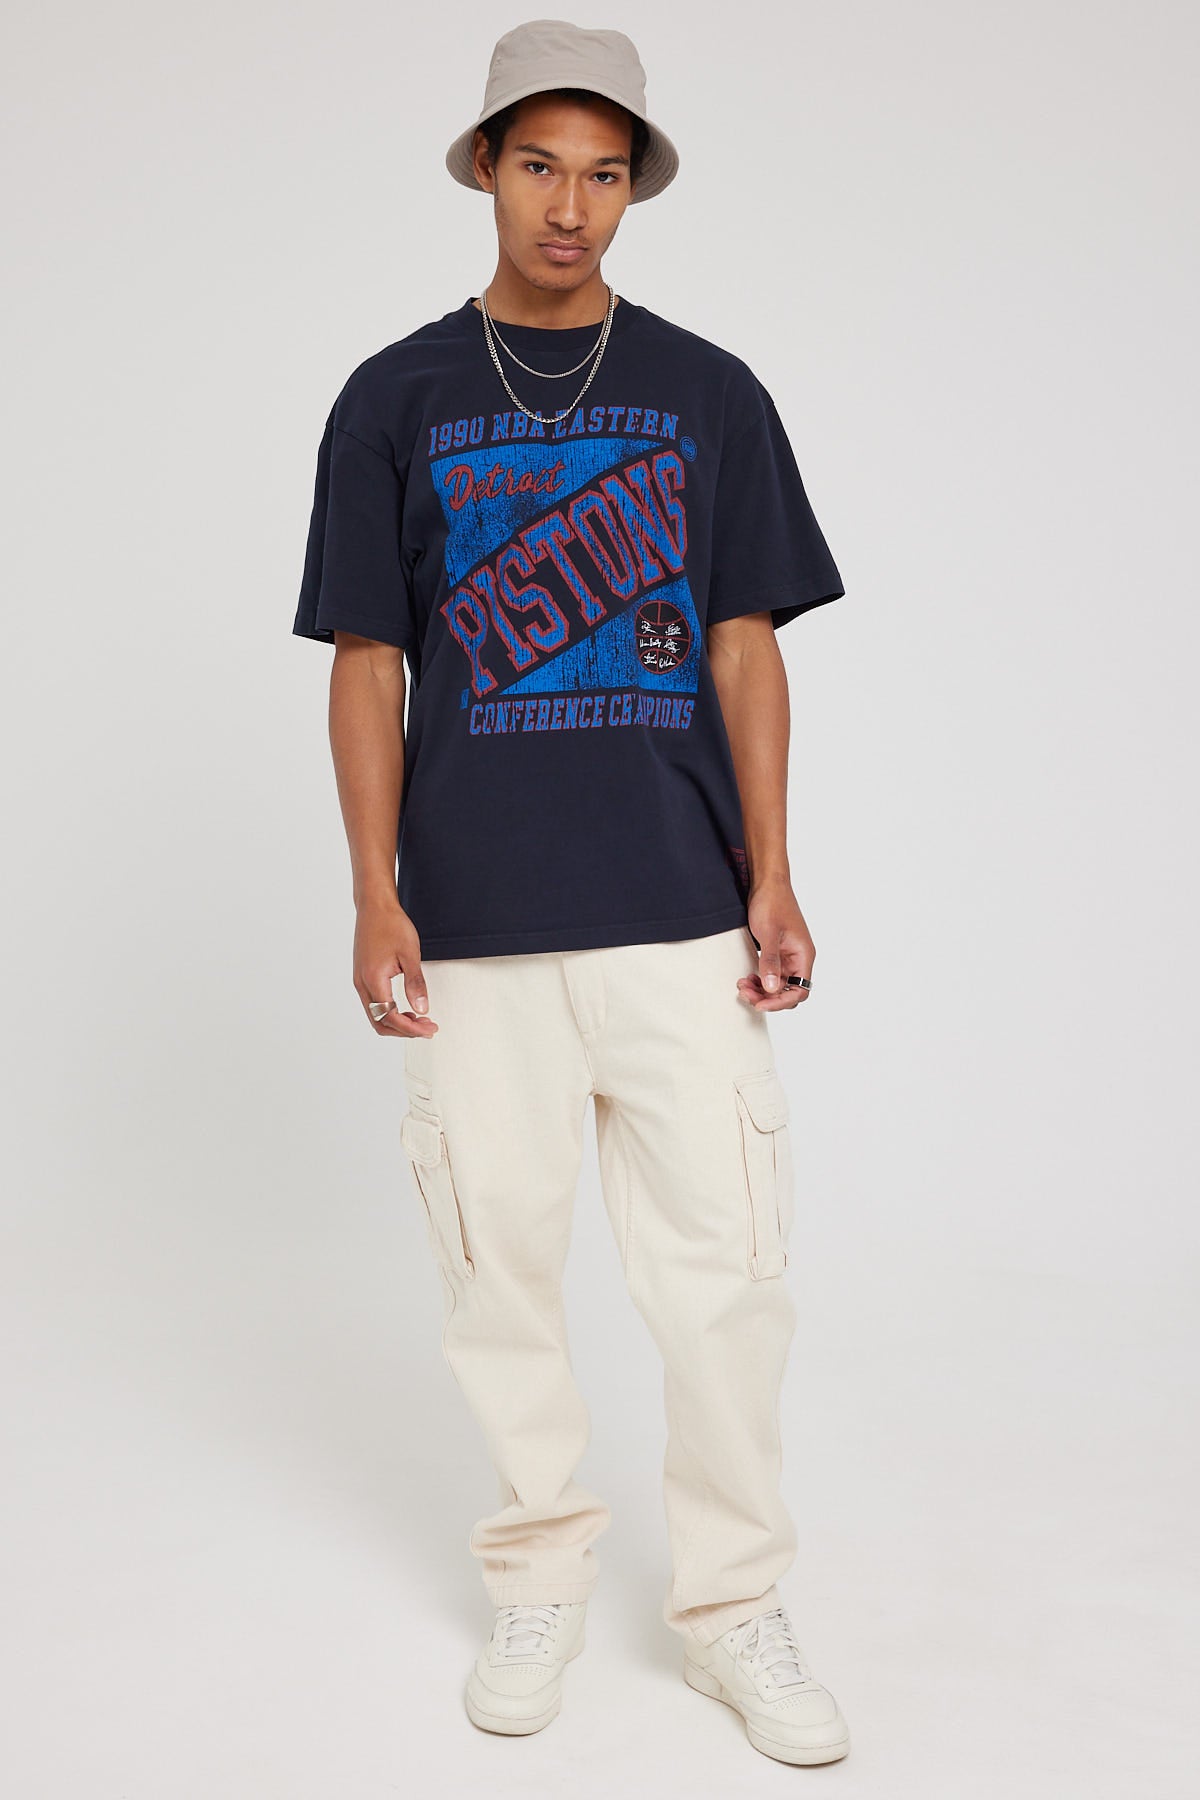 Mitchell & Ness Pistons 90 Conference Champs Tee Faded Black